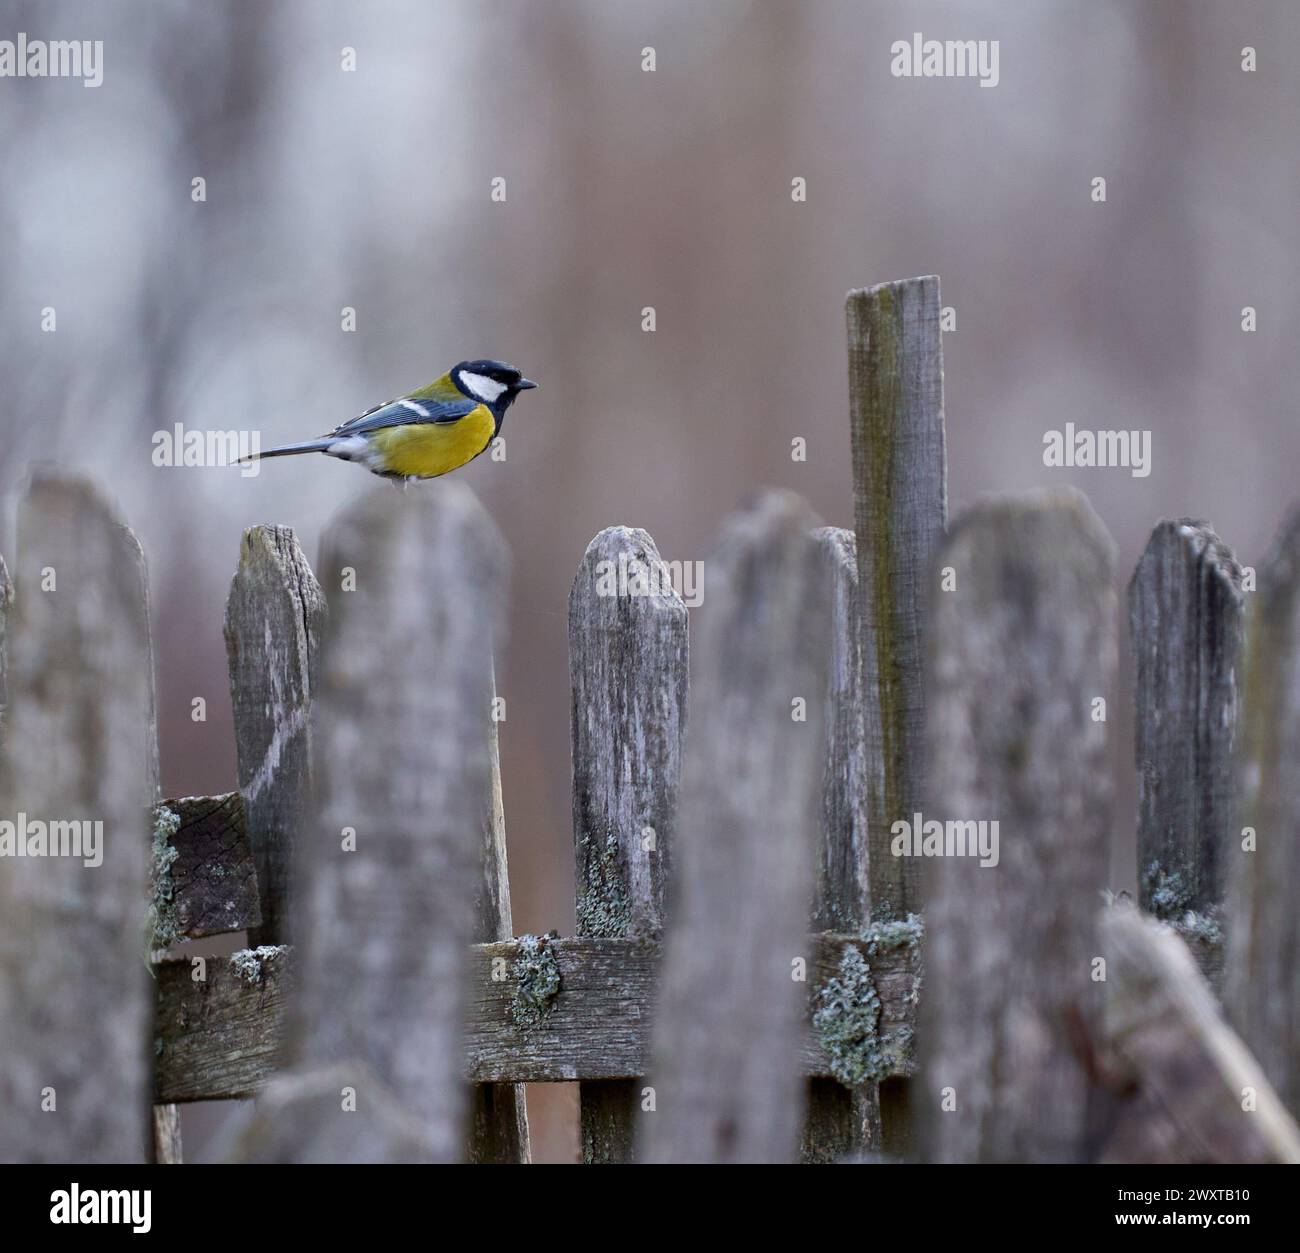 Great tit (Parus major) perched on a wooden fence near the forest with copyspace Stock Photo